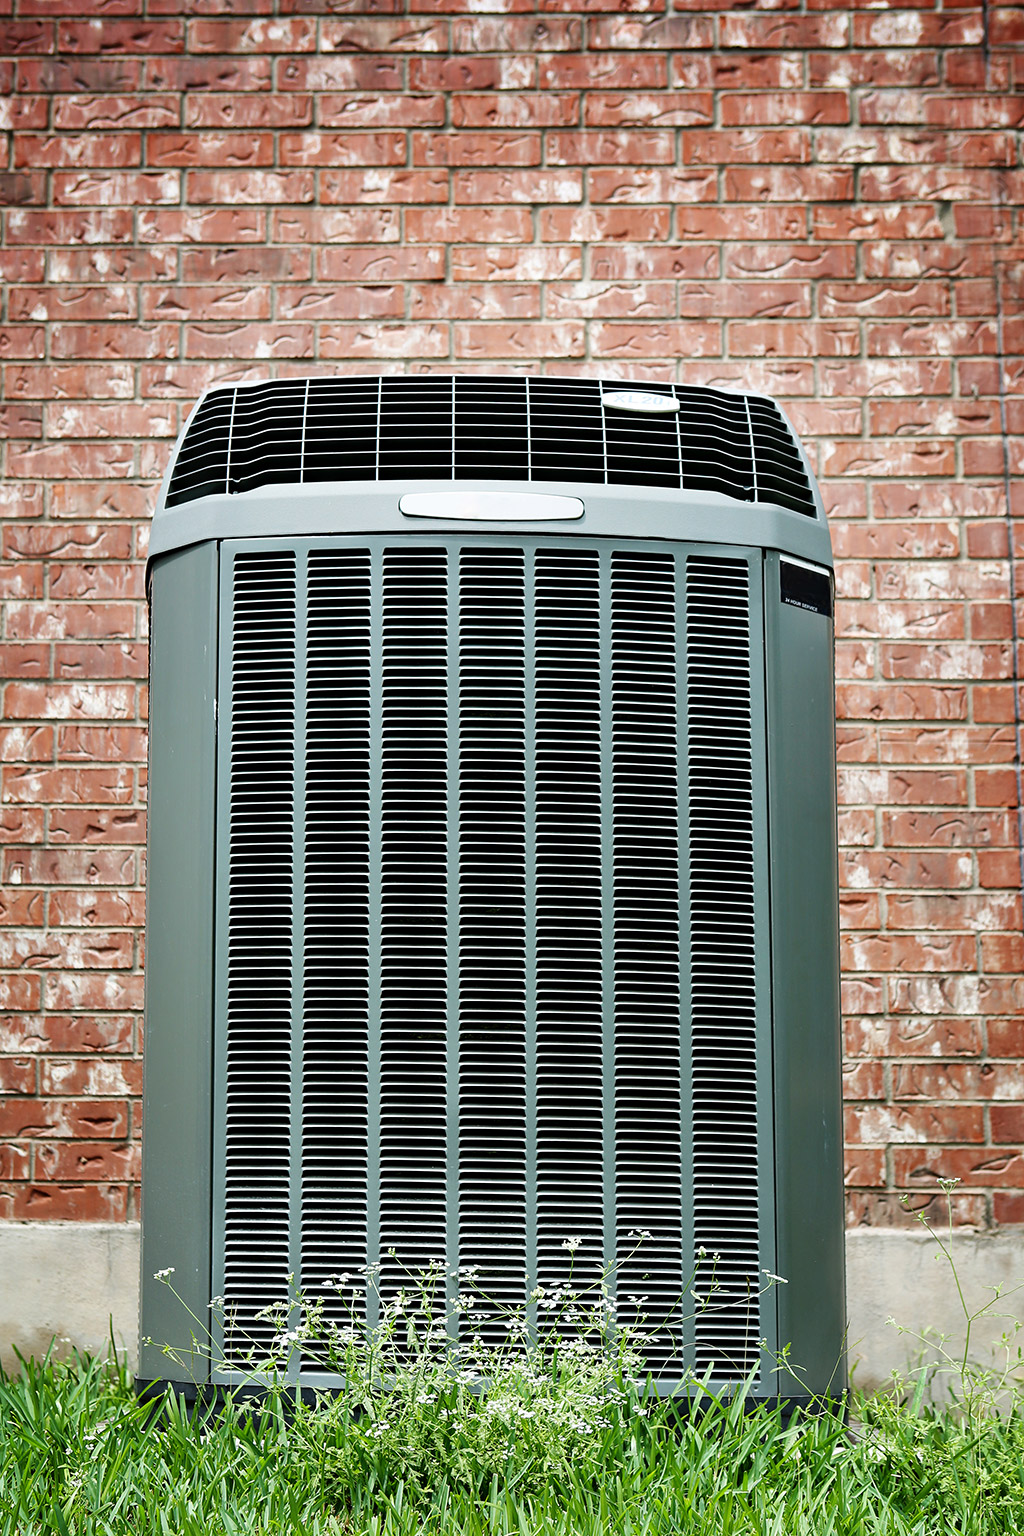 Heating and Air Conditioning Repair in Mesquite, TX Asks You to Consider 3 Factors Before Installing an HVAC Unit